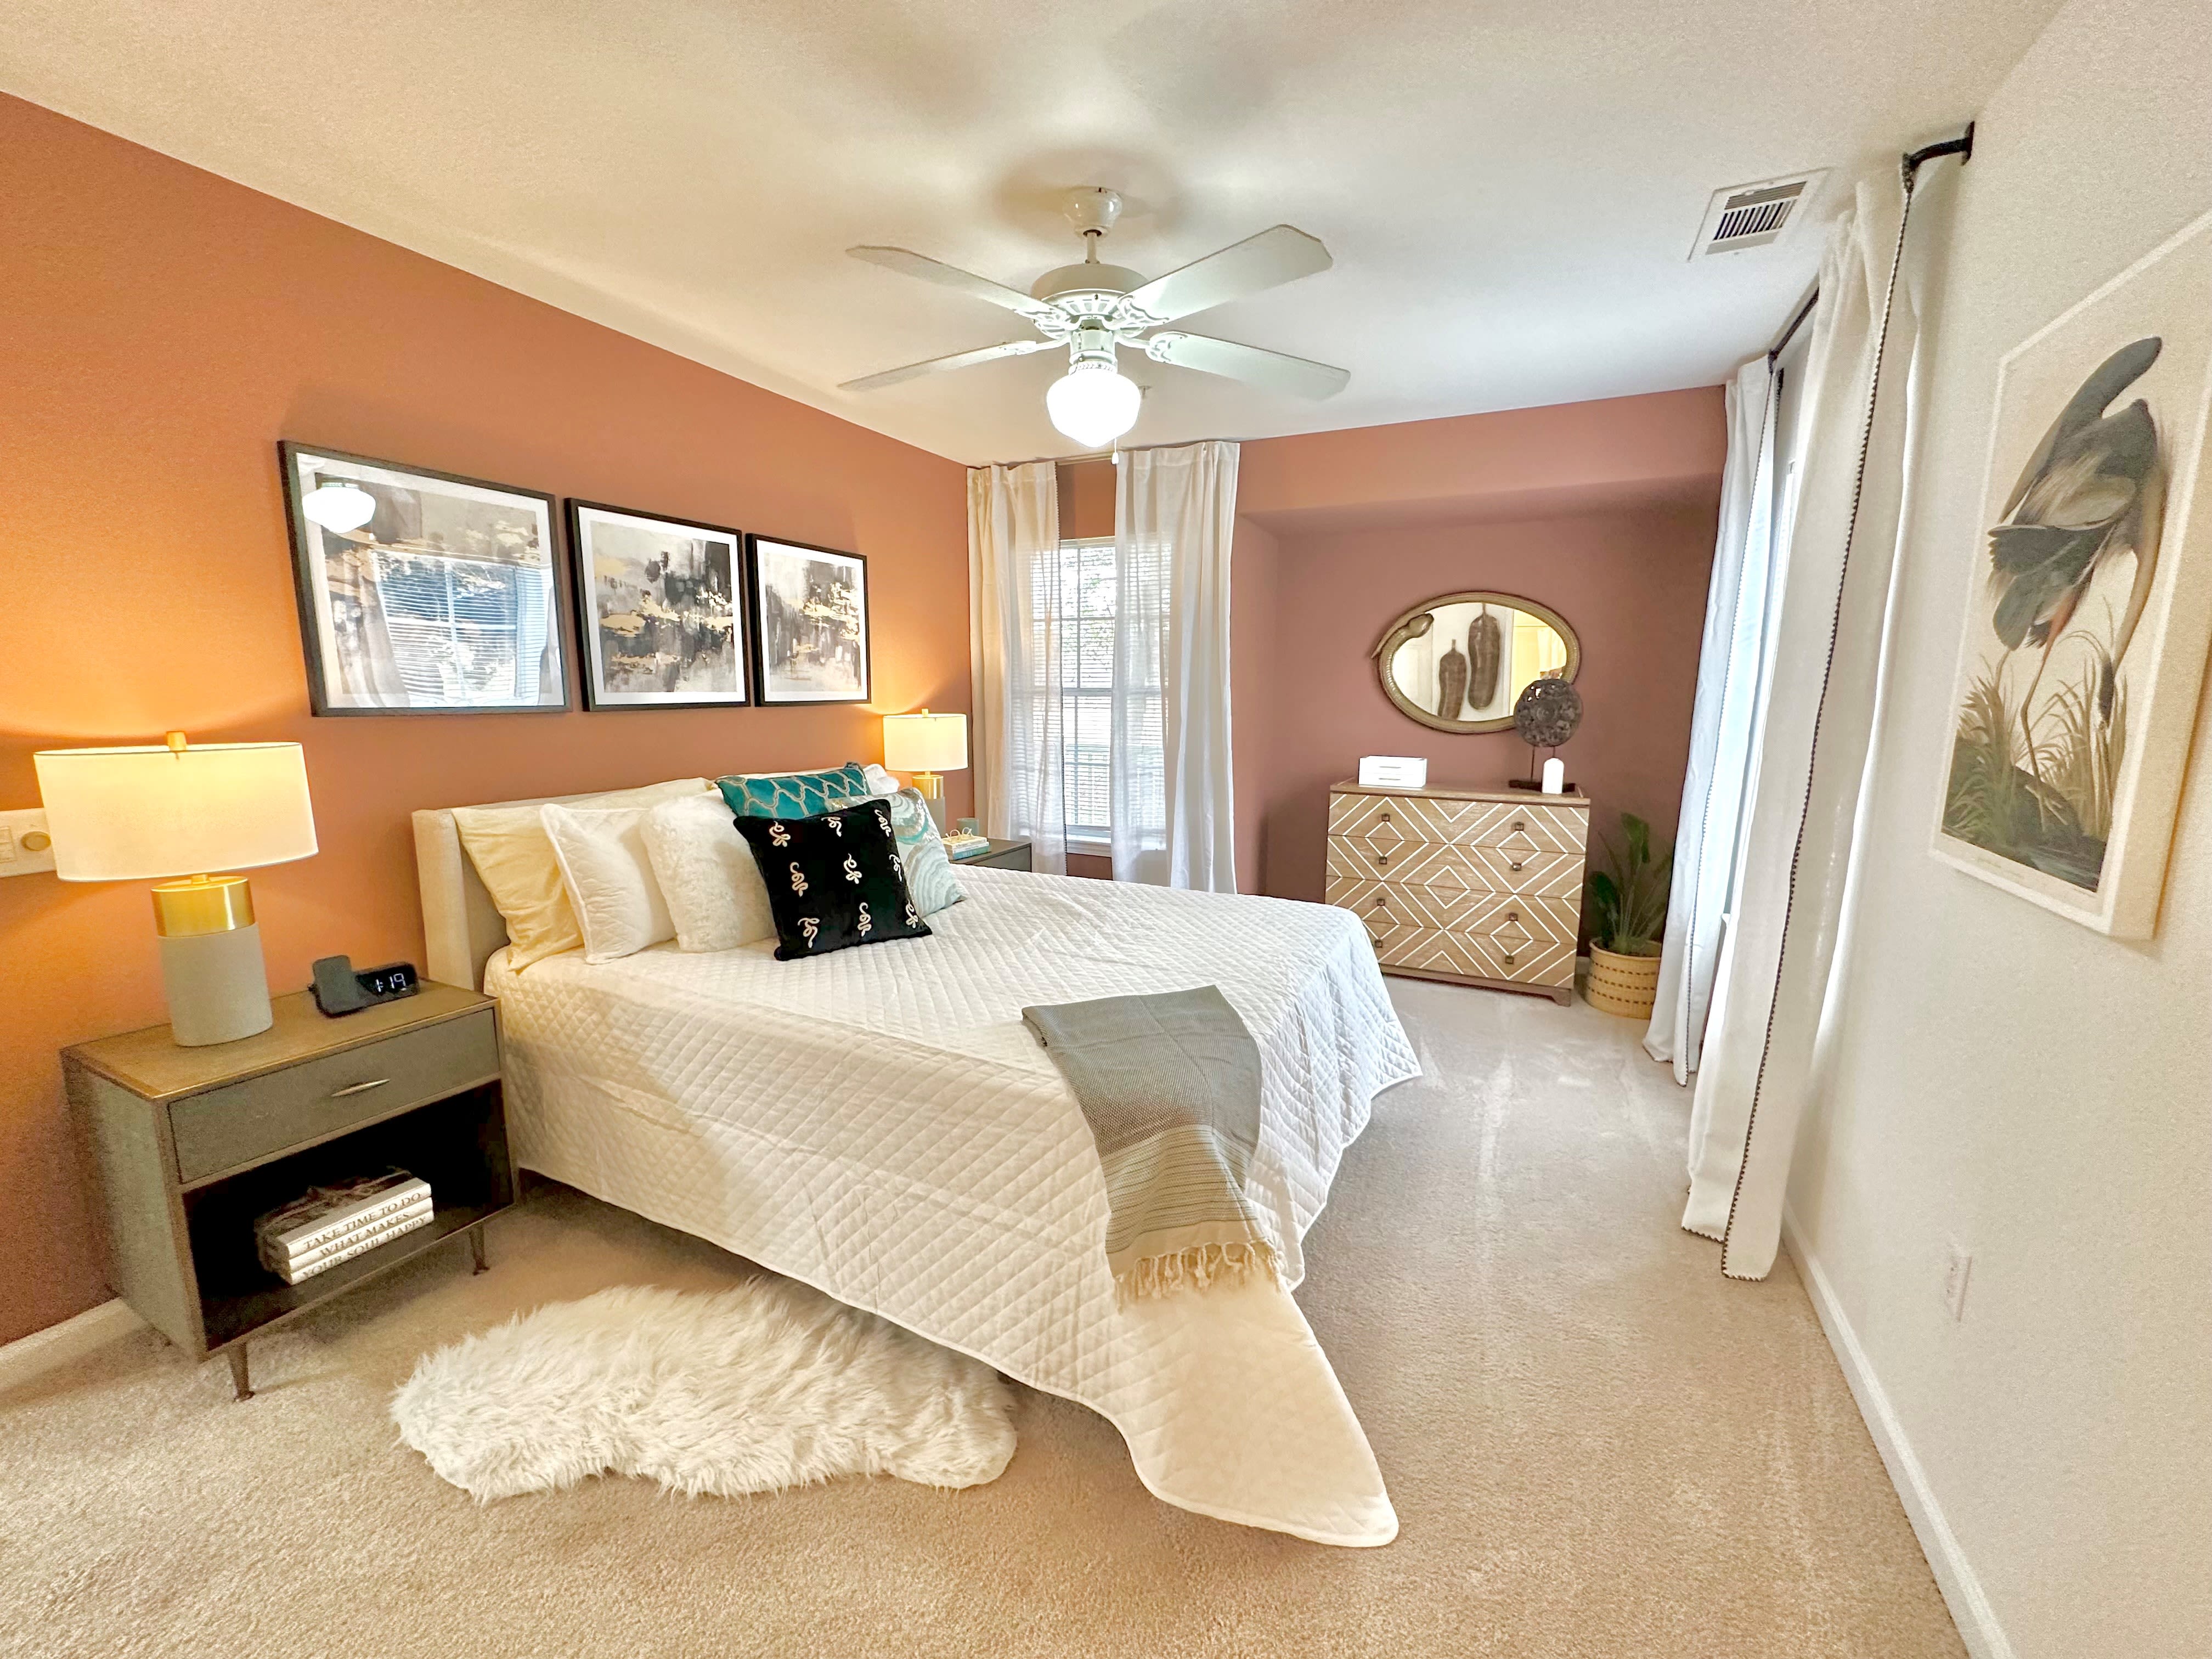 Spacious master bedroom with plush carpeting at Glade Creek Apartments in Roanoke, Virginia